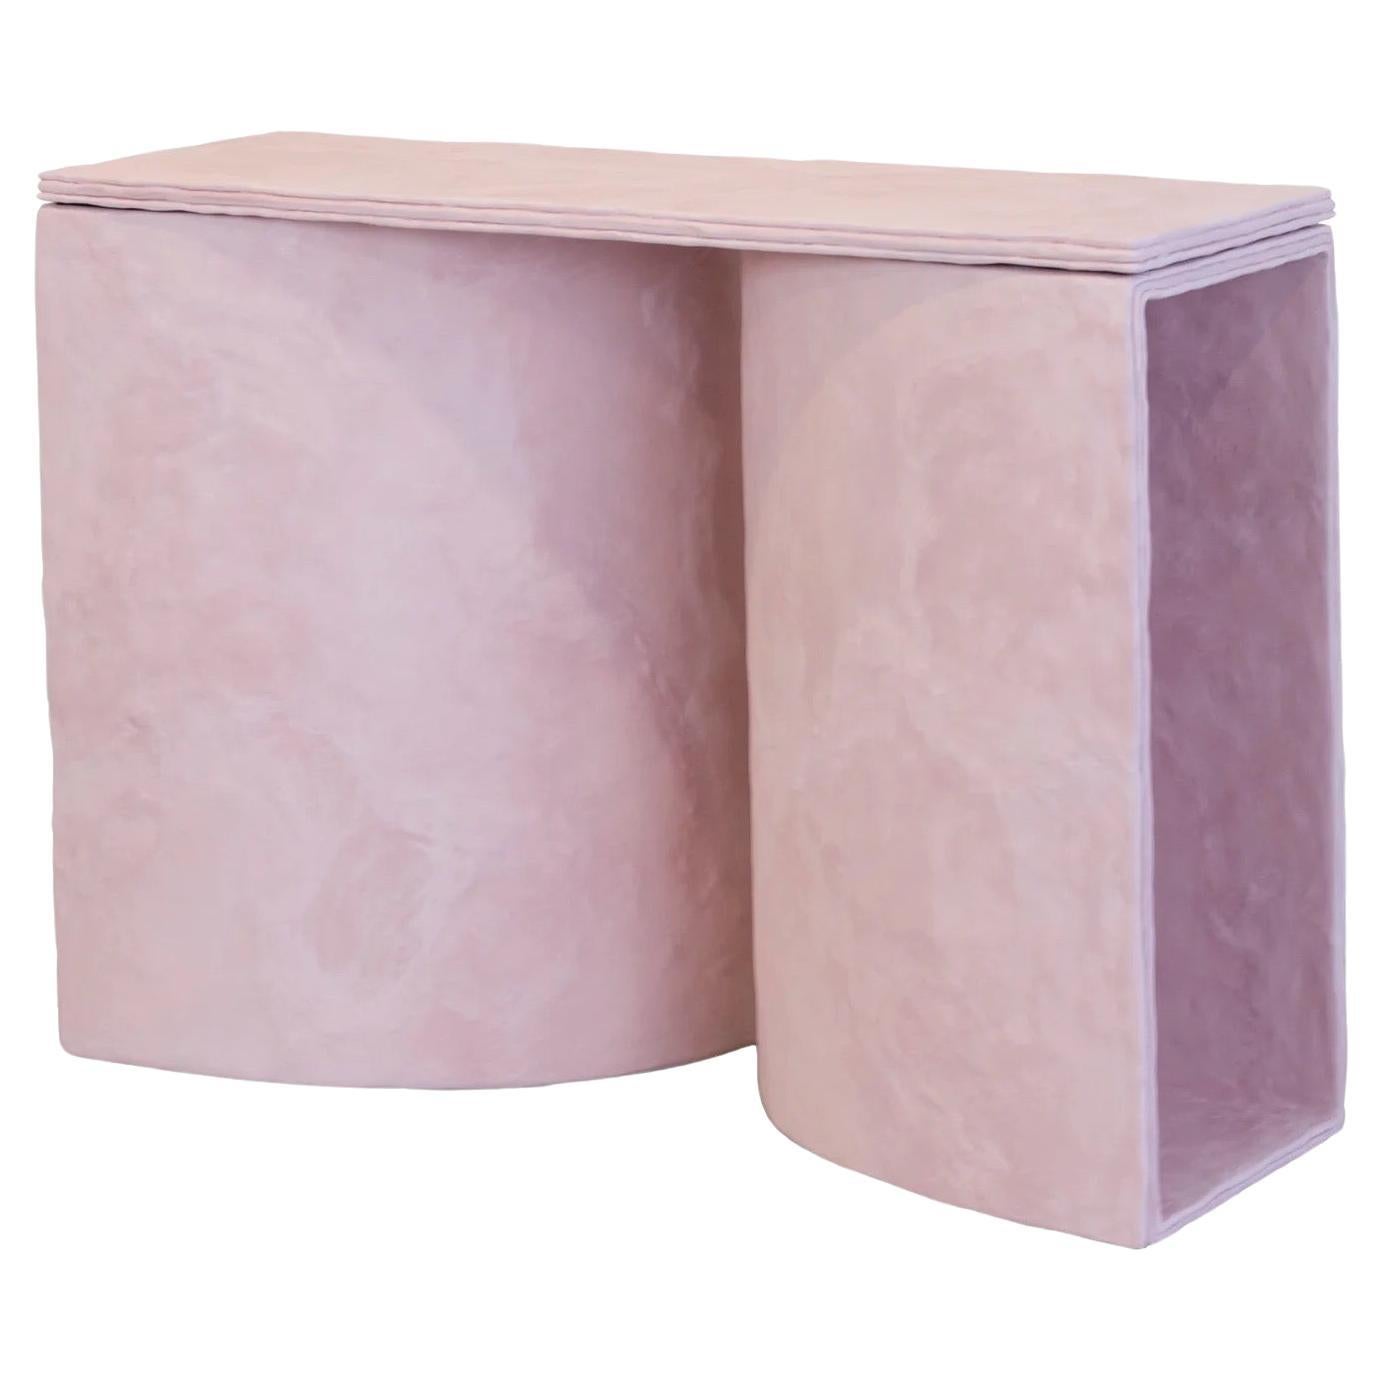 PLANE Console/Console Table Pink Cement by Bailey Fontaine REPby Tuleste Factory For Sale